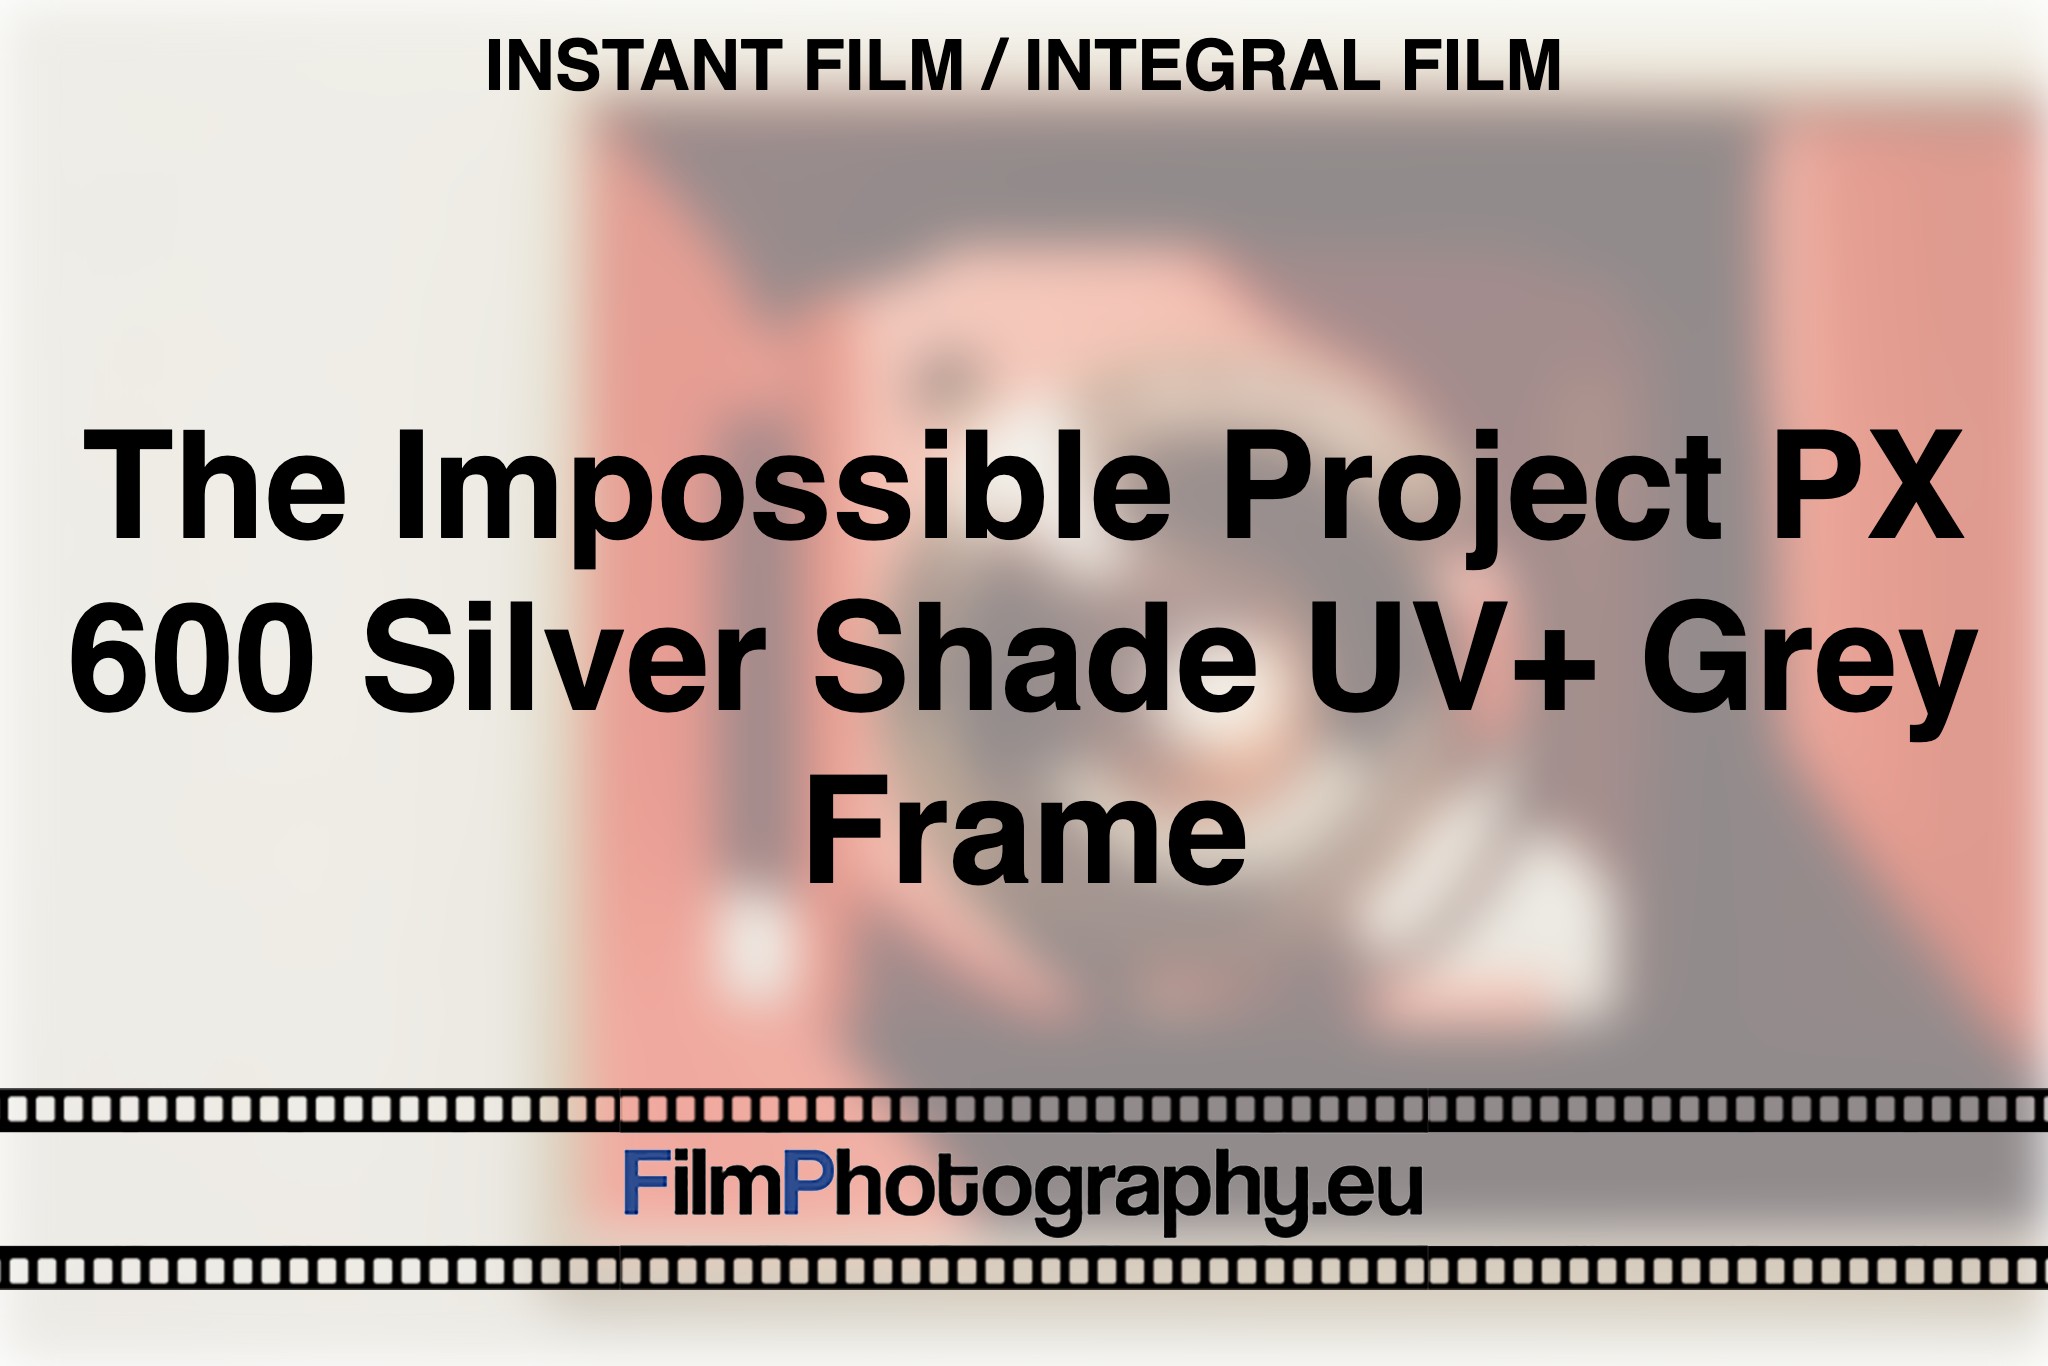 the-impossible-project-px-600-silver-shade-uv-grey-frame-instant-film-integral-film-bnv